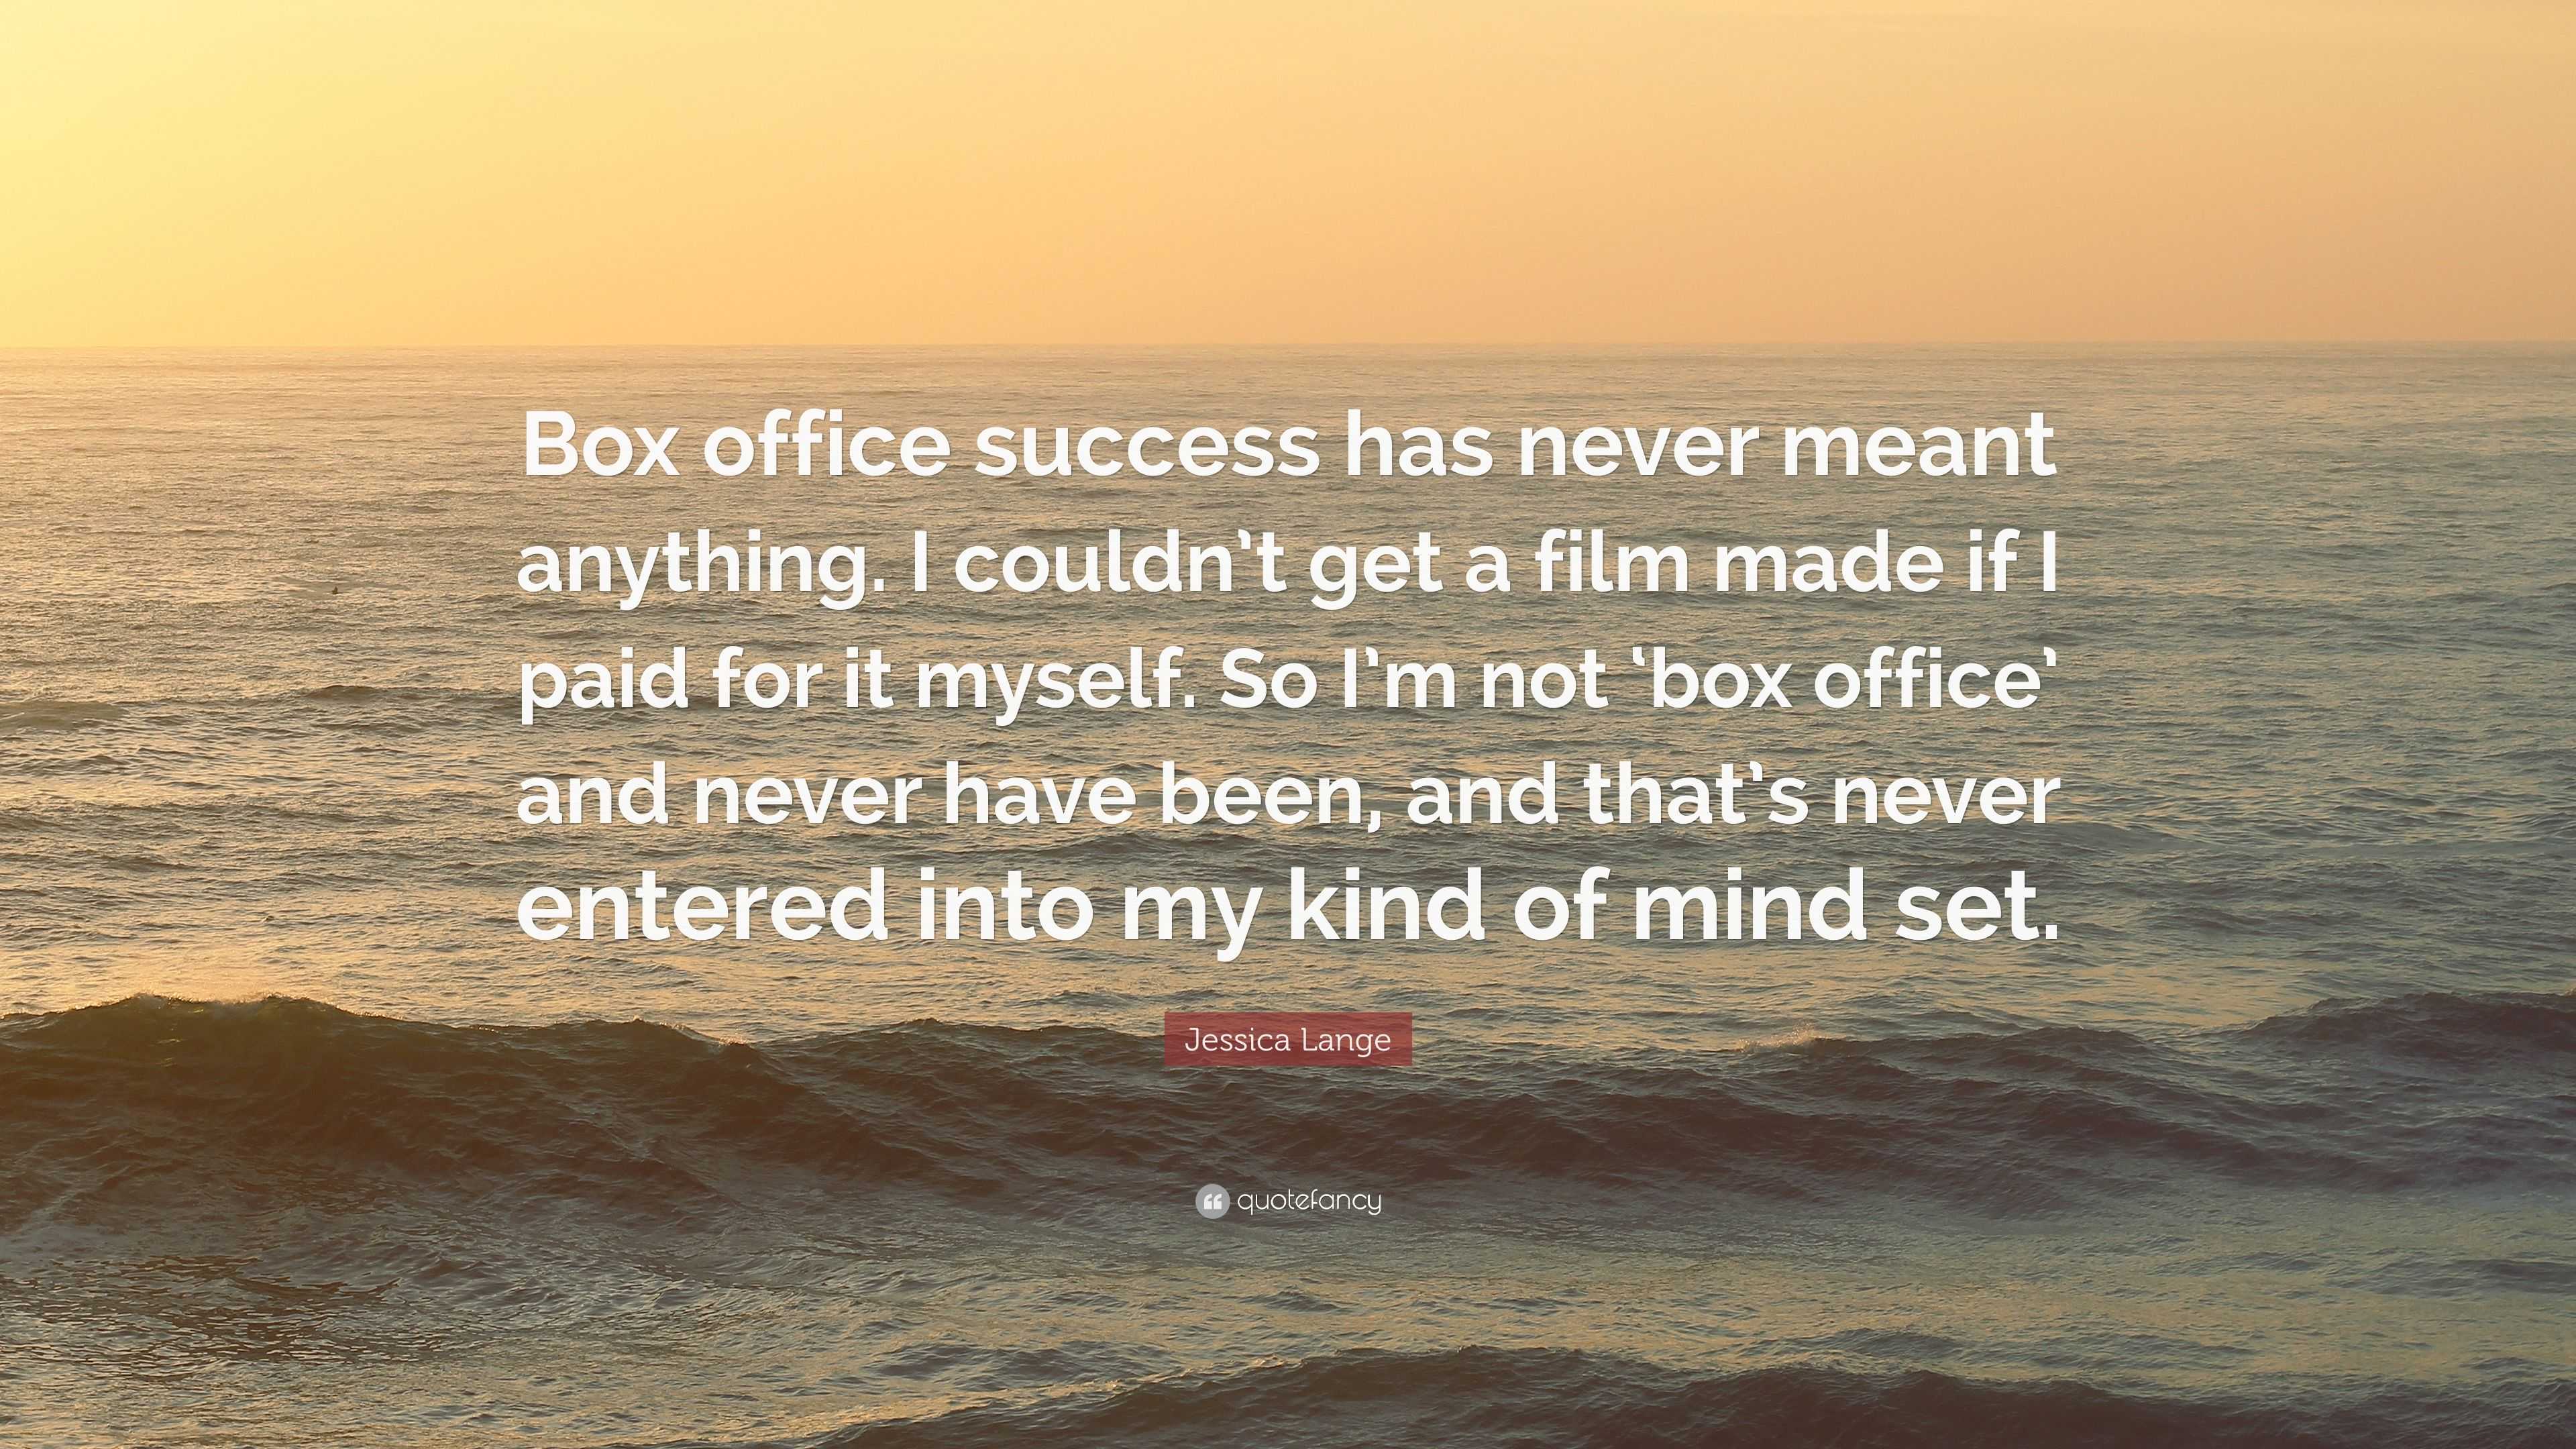 Jessica Lange Quote “Box office success has never meant anything. I